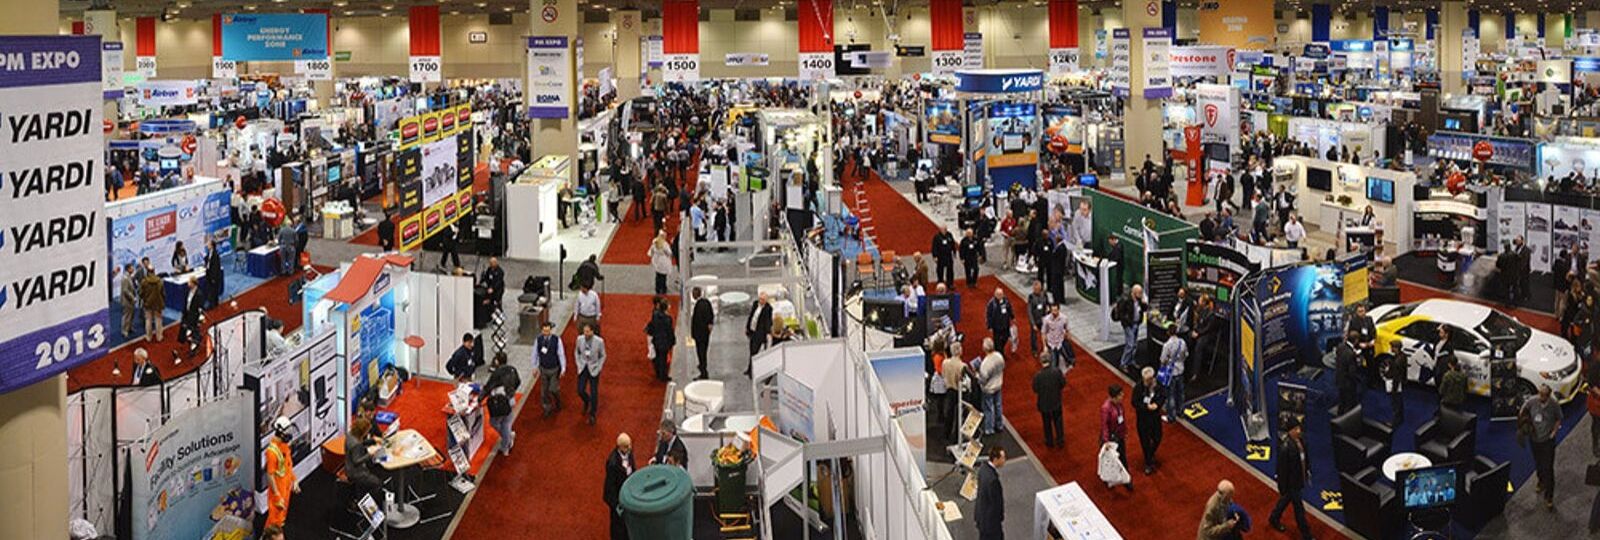 Bird's eye view of tradeshow floor at PM expo